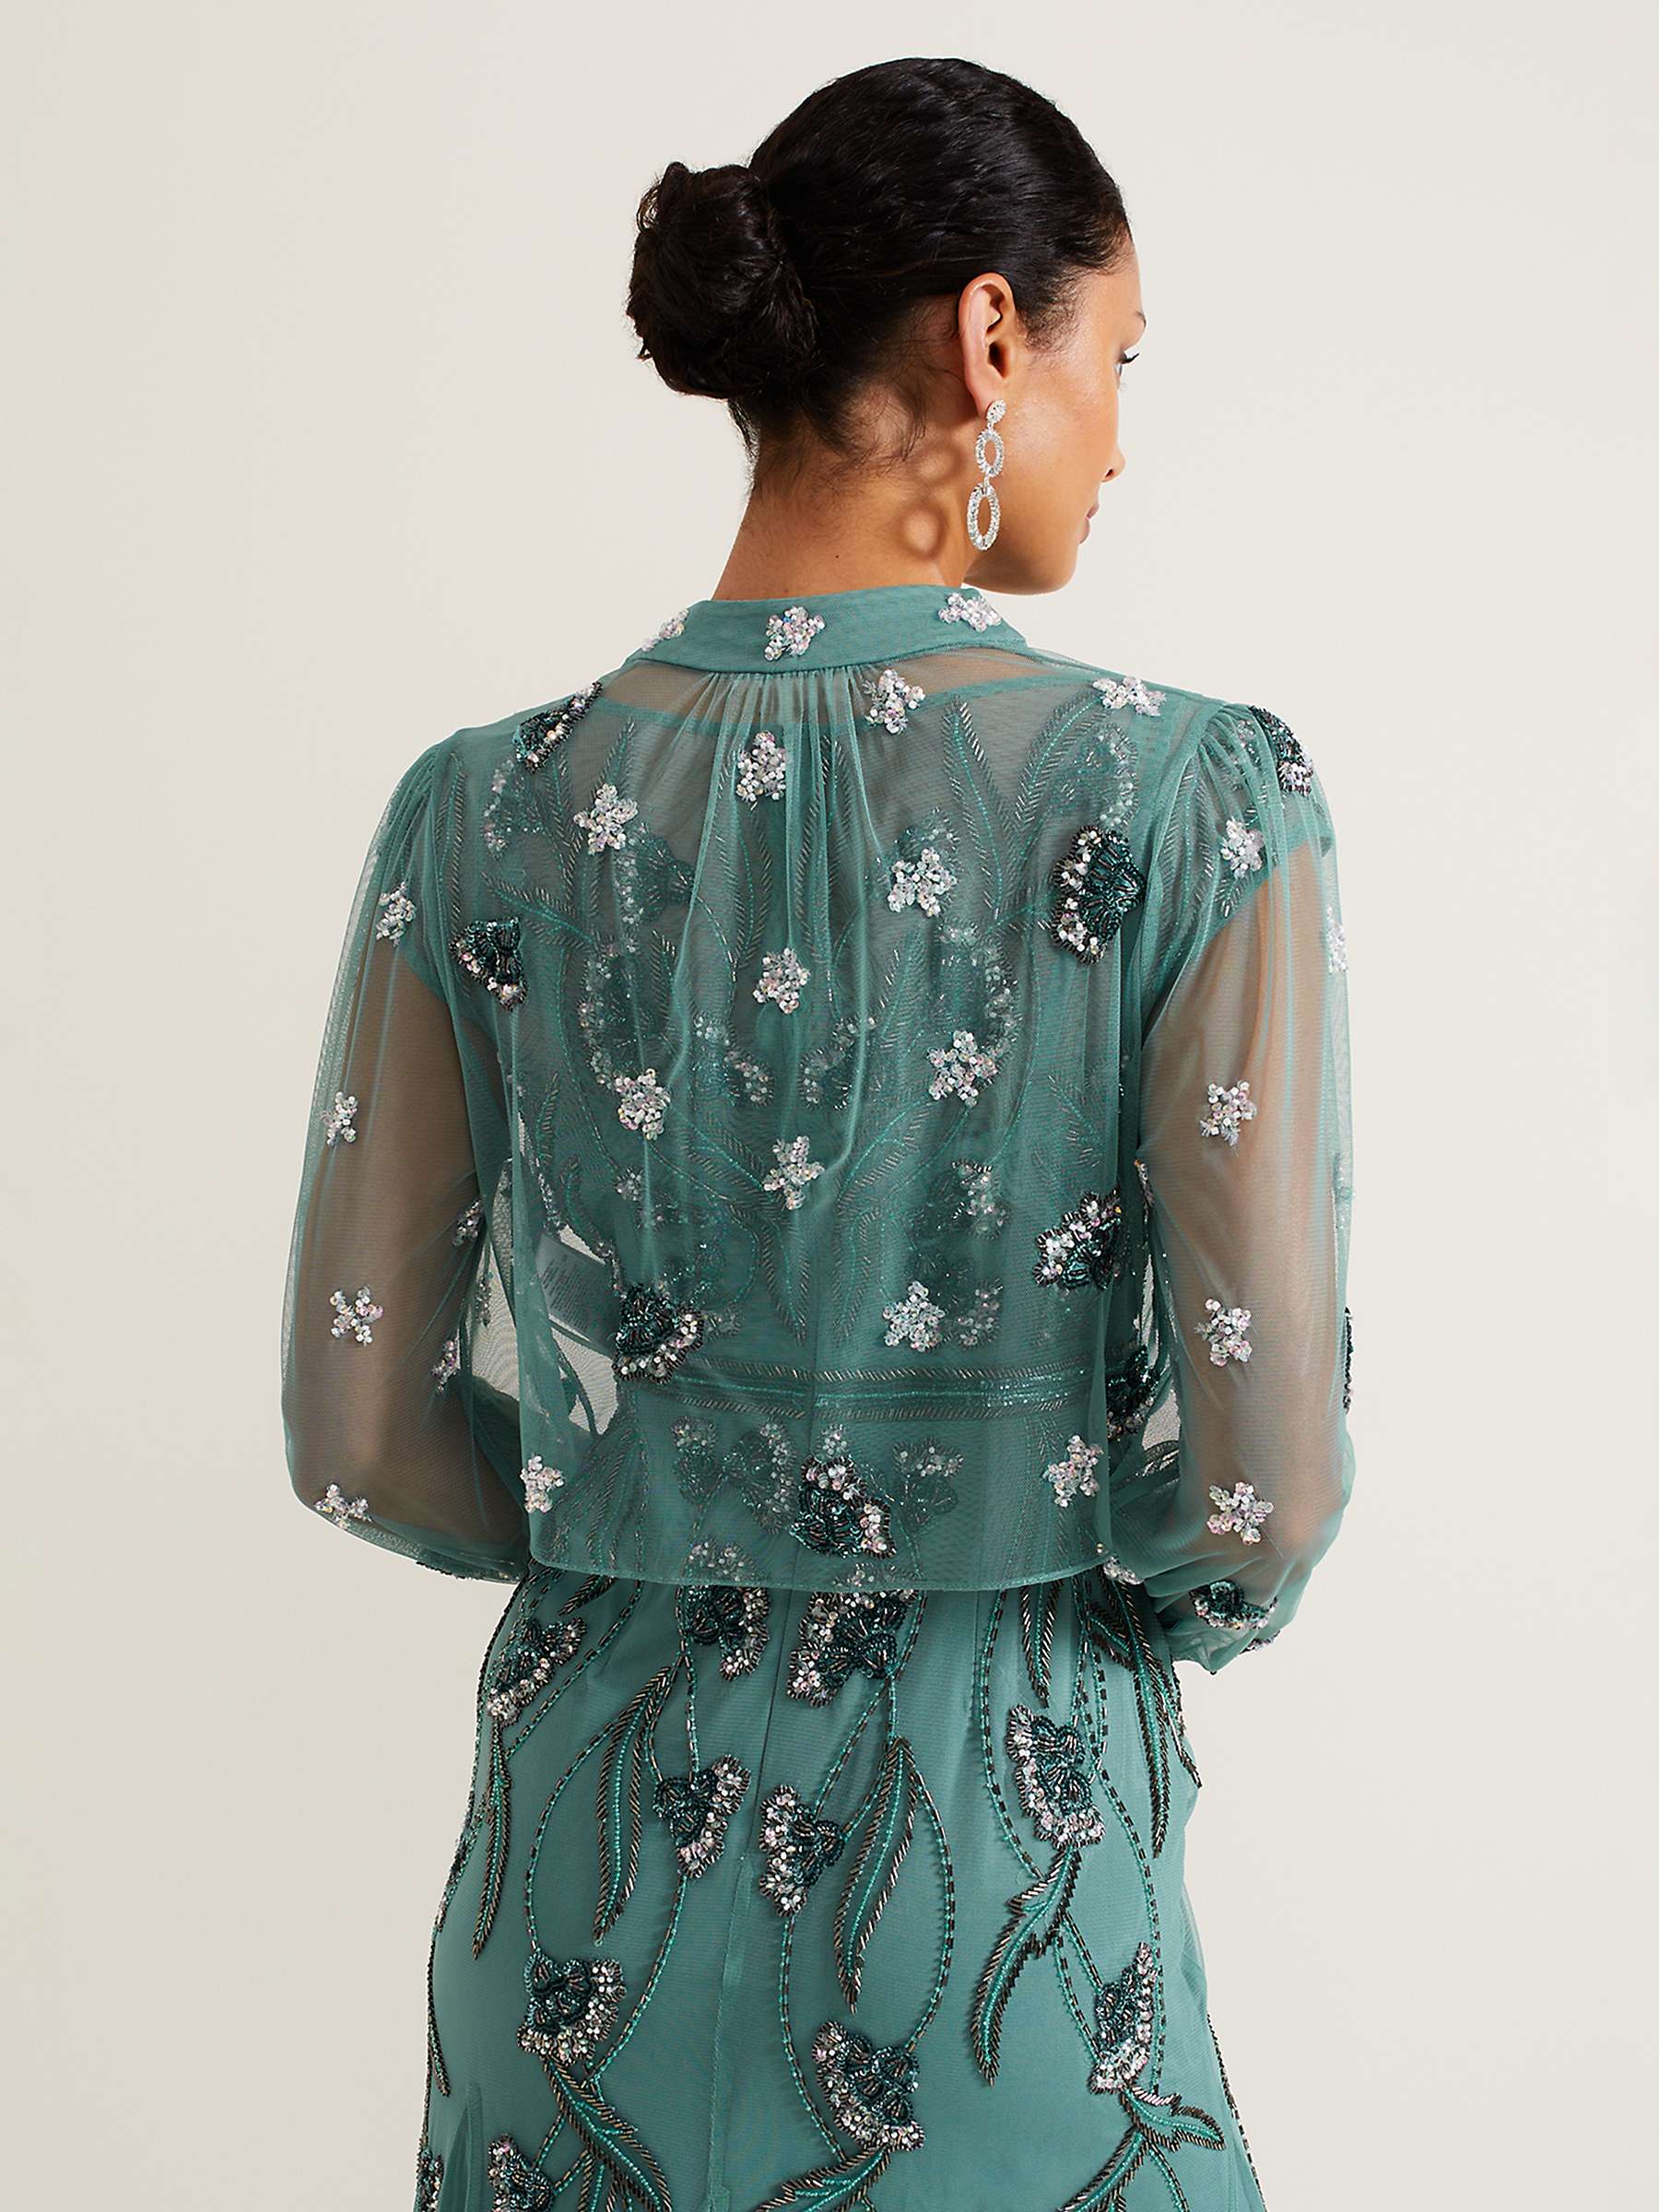 Buy Phase Eight Fi Embellished Wrap Cover Up, Light Green Online at johnlewis.com